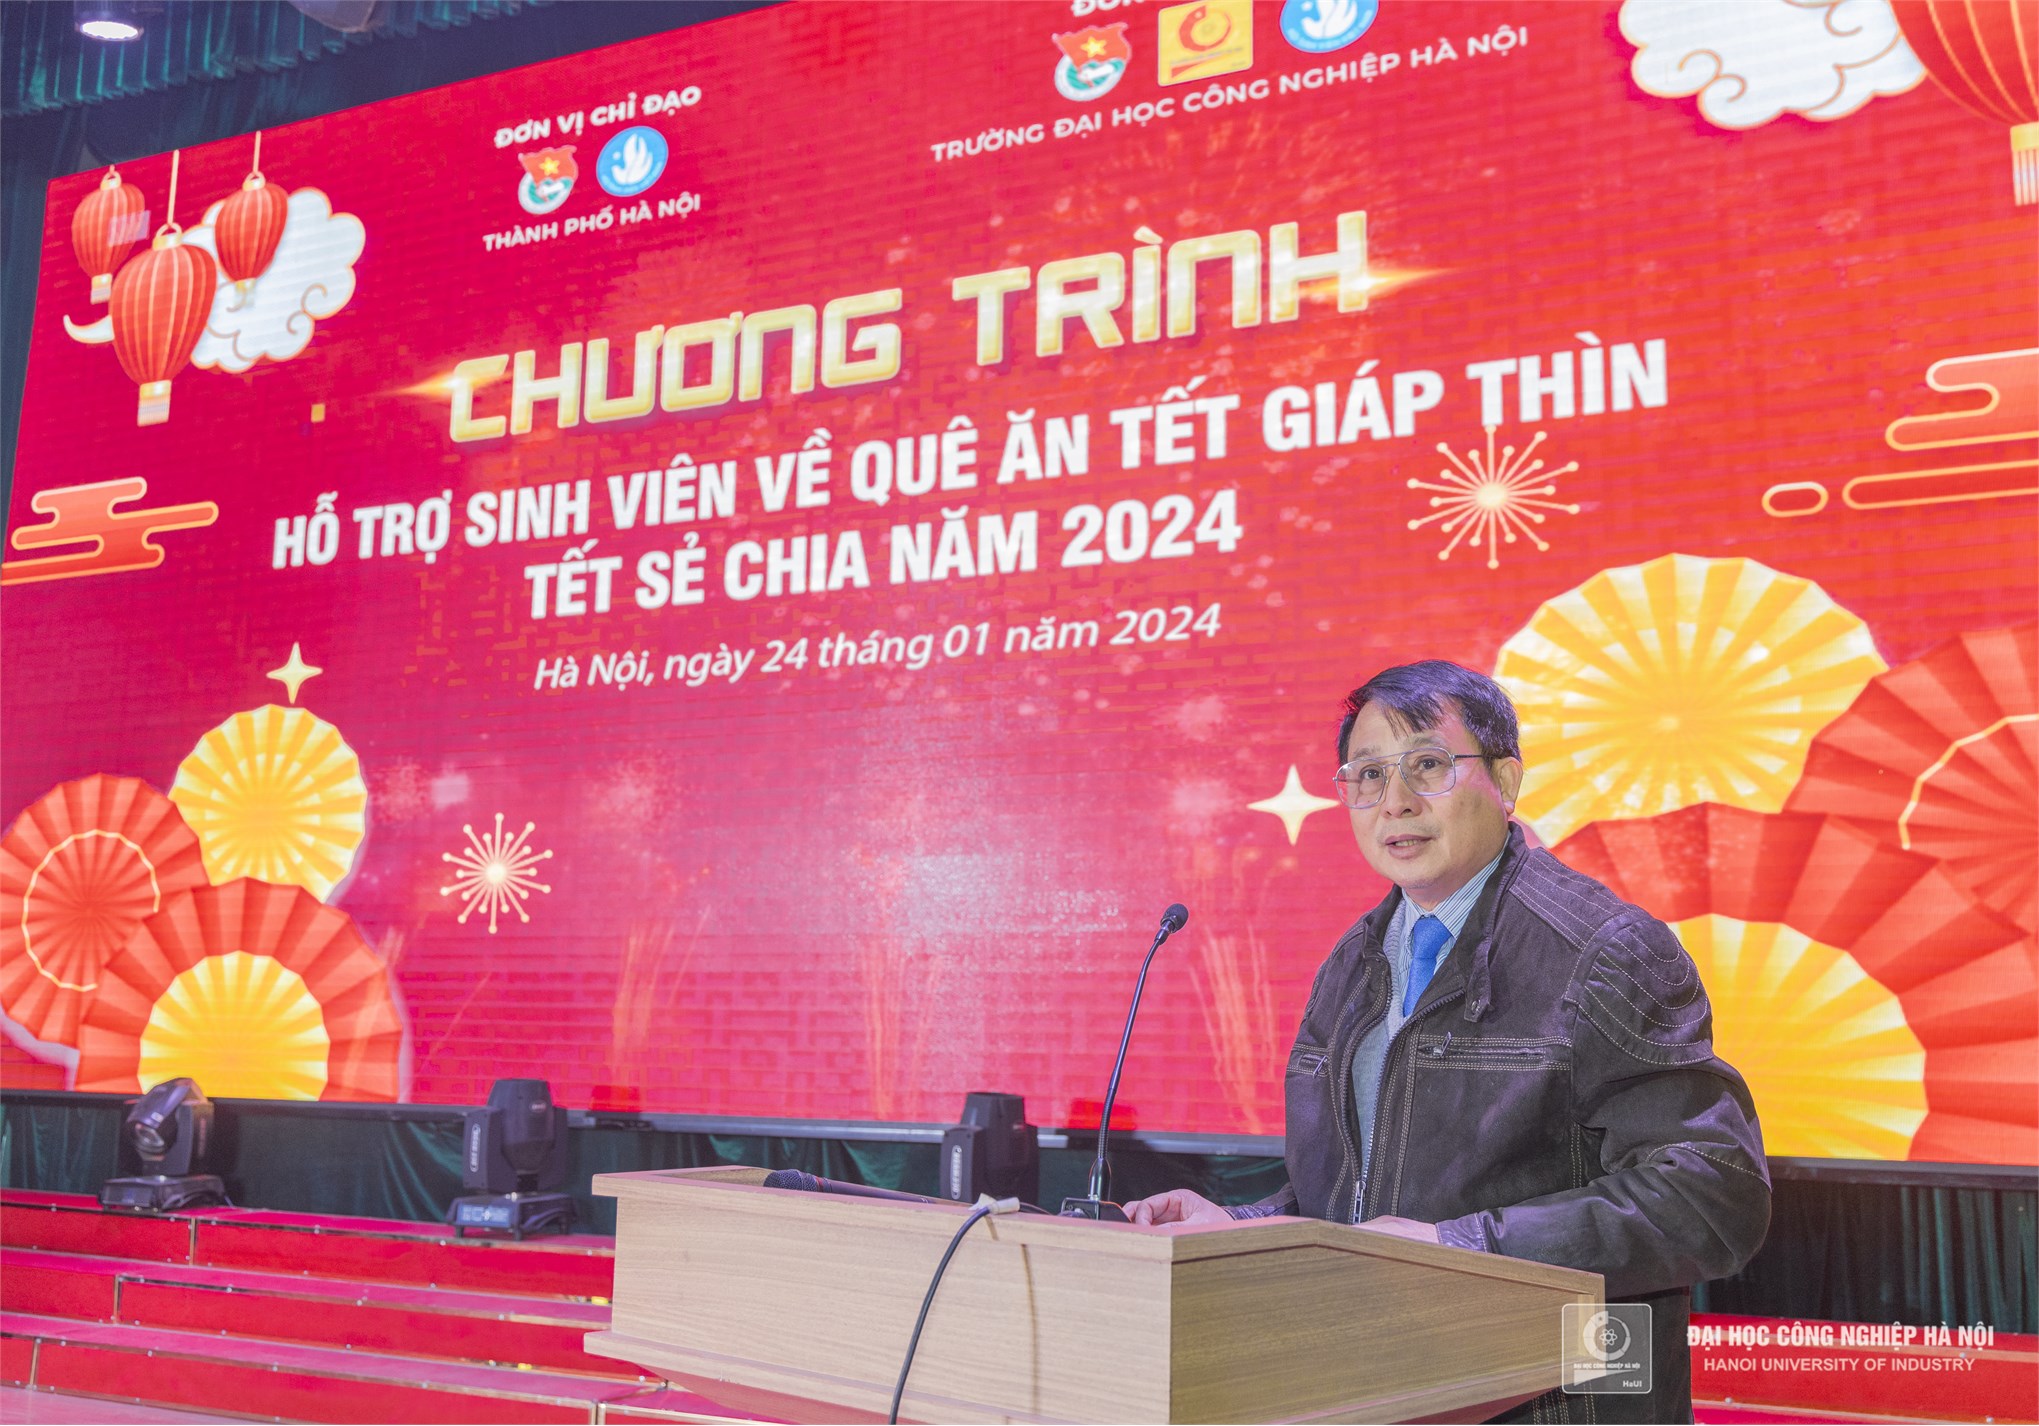 Spring Reunion - Tet Sharing: Igniting the Flame of Love at Hanoi University of Industry